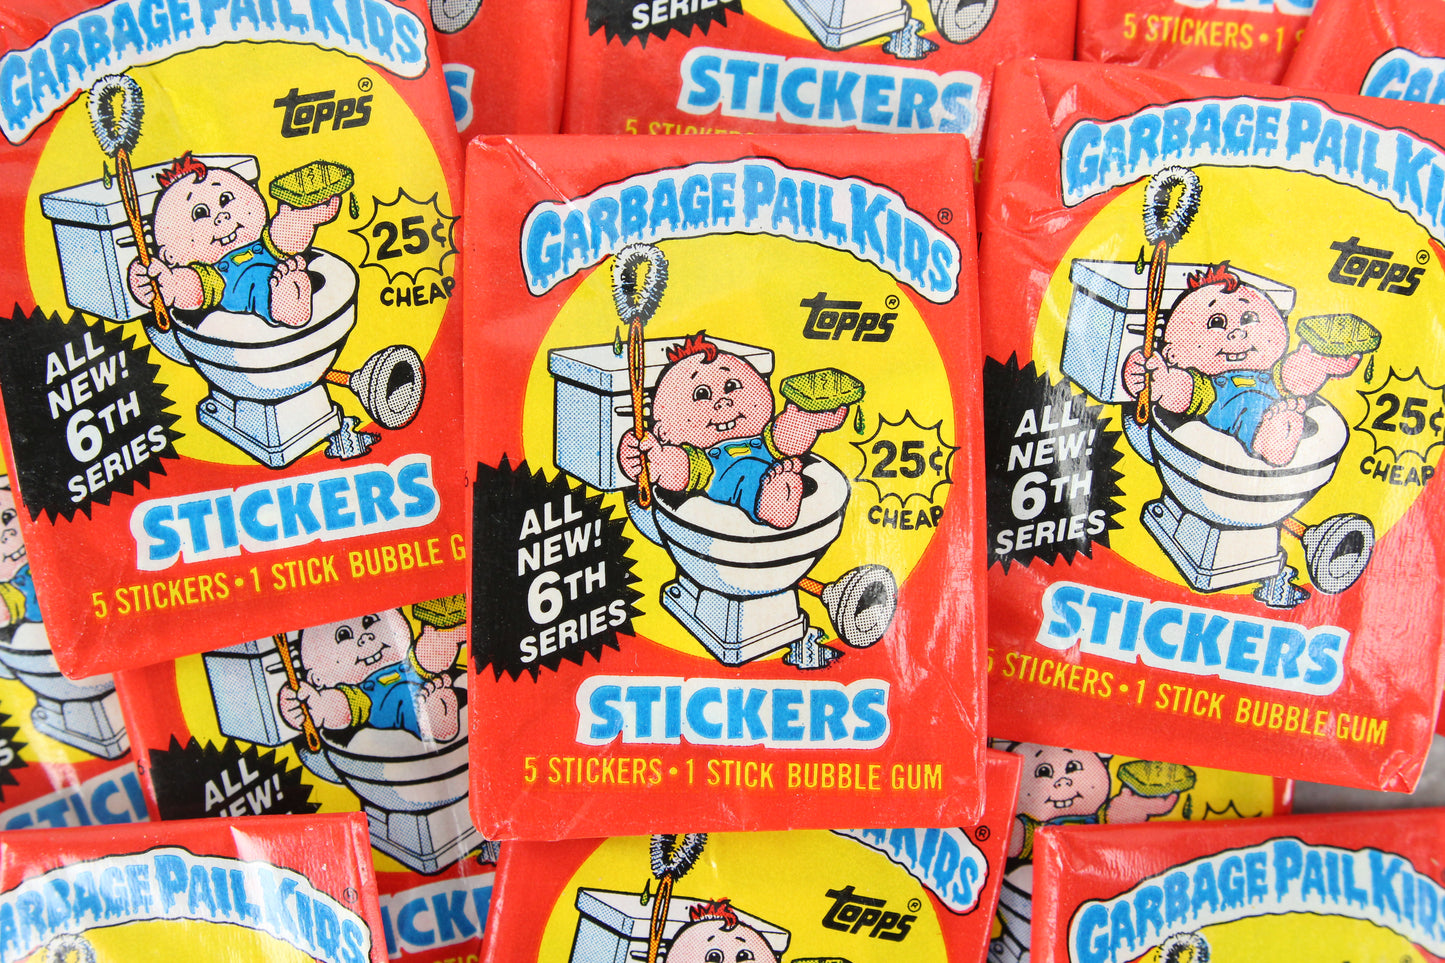 Topps Garbage Pail Kids 6th Series Collectible Trading Card Stickers, One Wax Pack, 1986